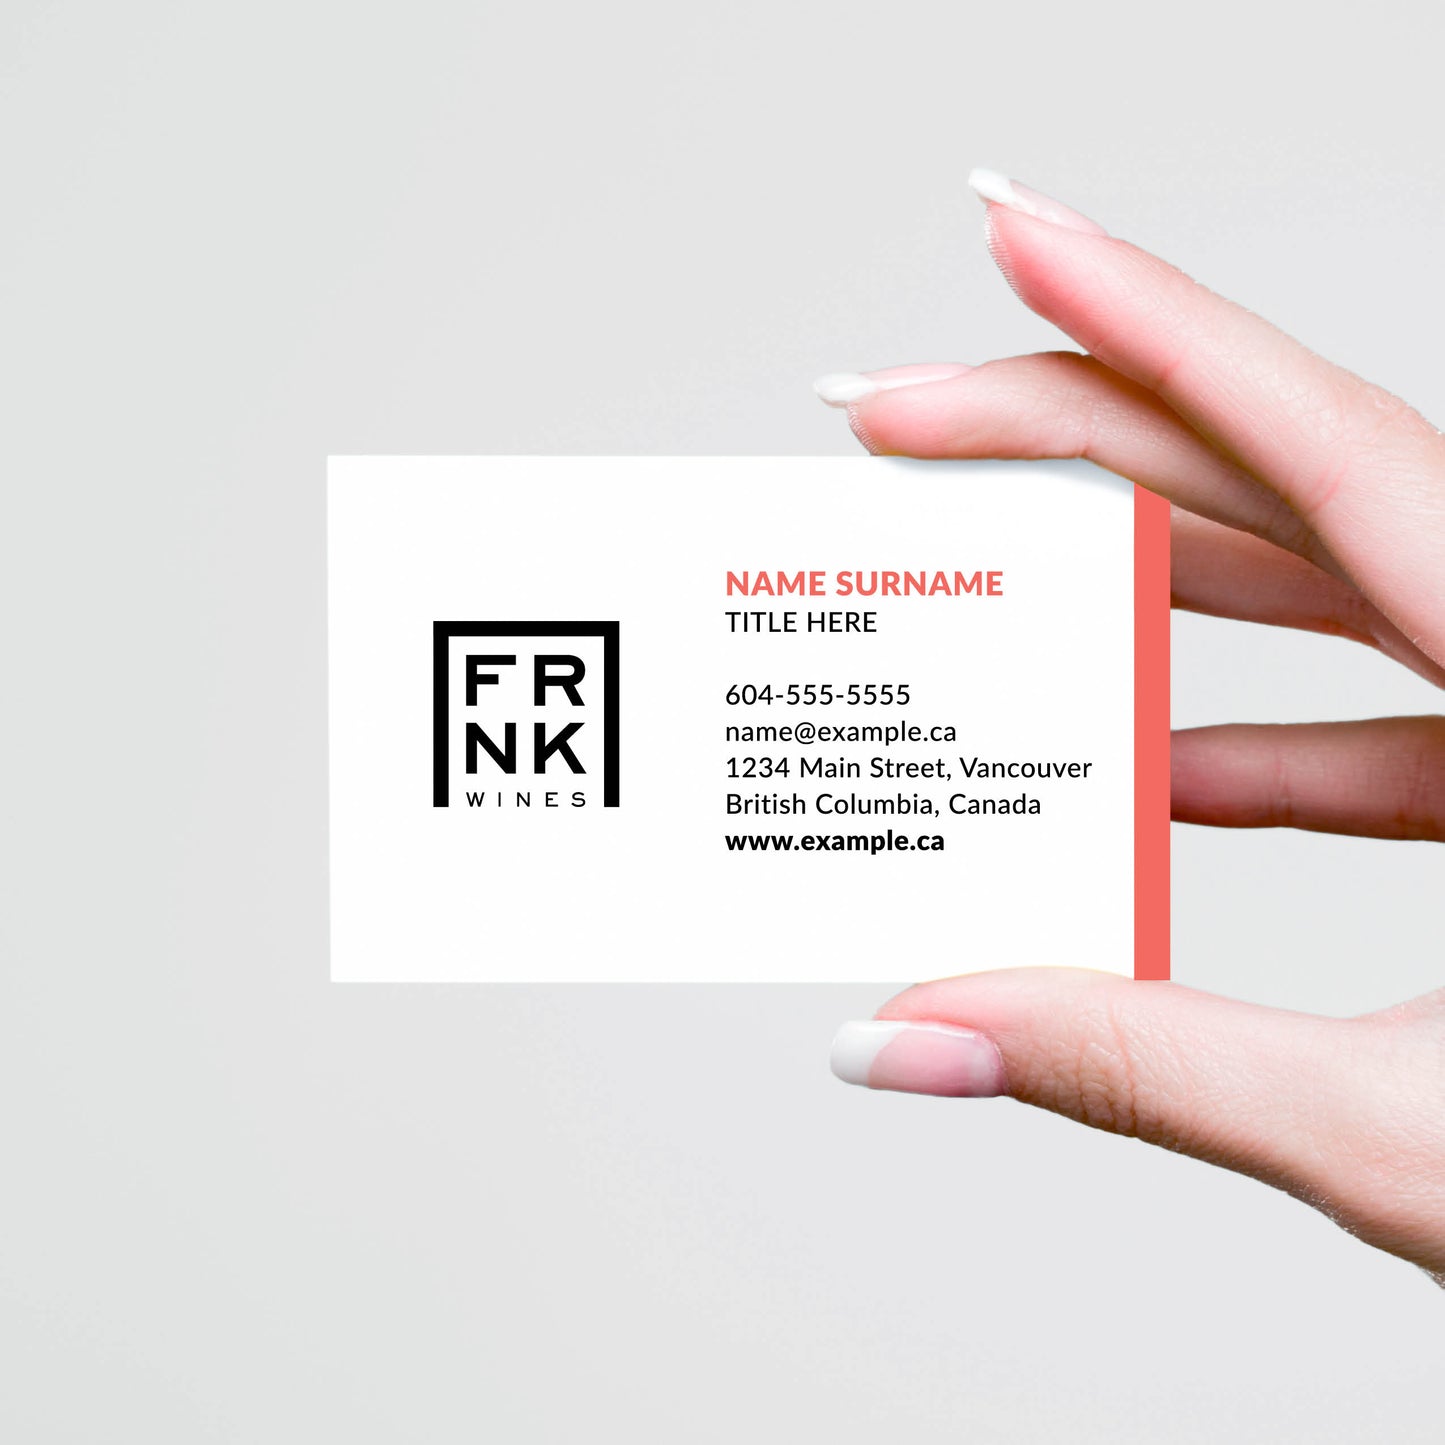 Business Card Design - Pick from five templated options